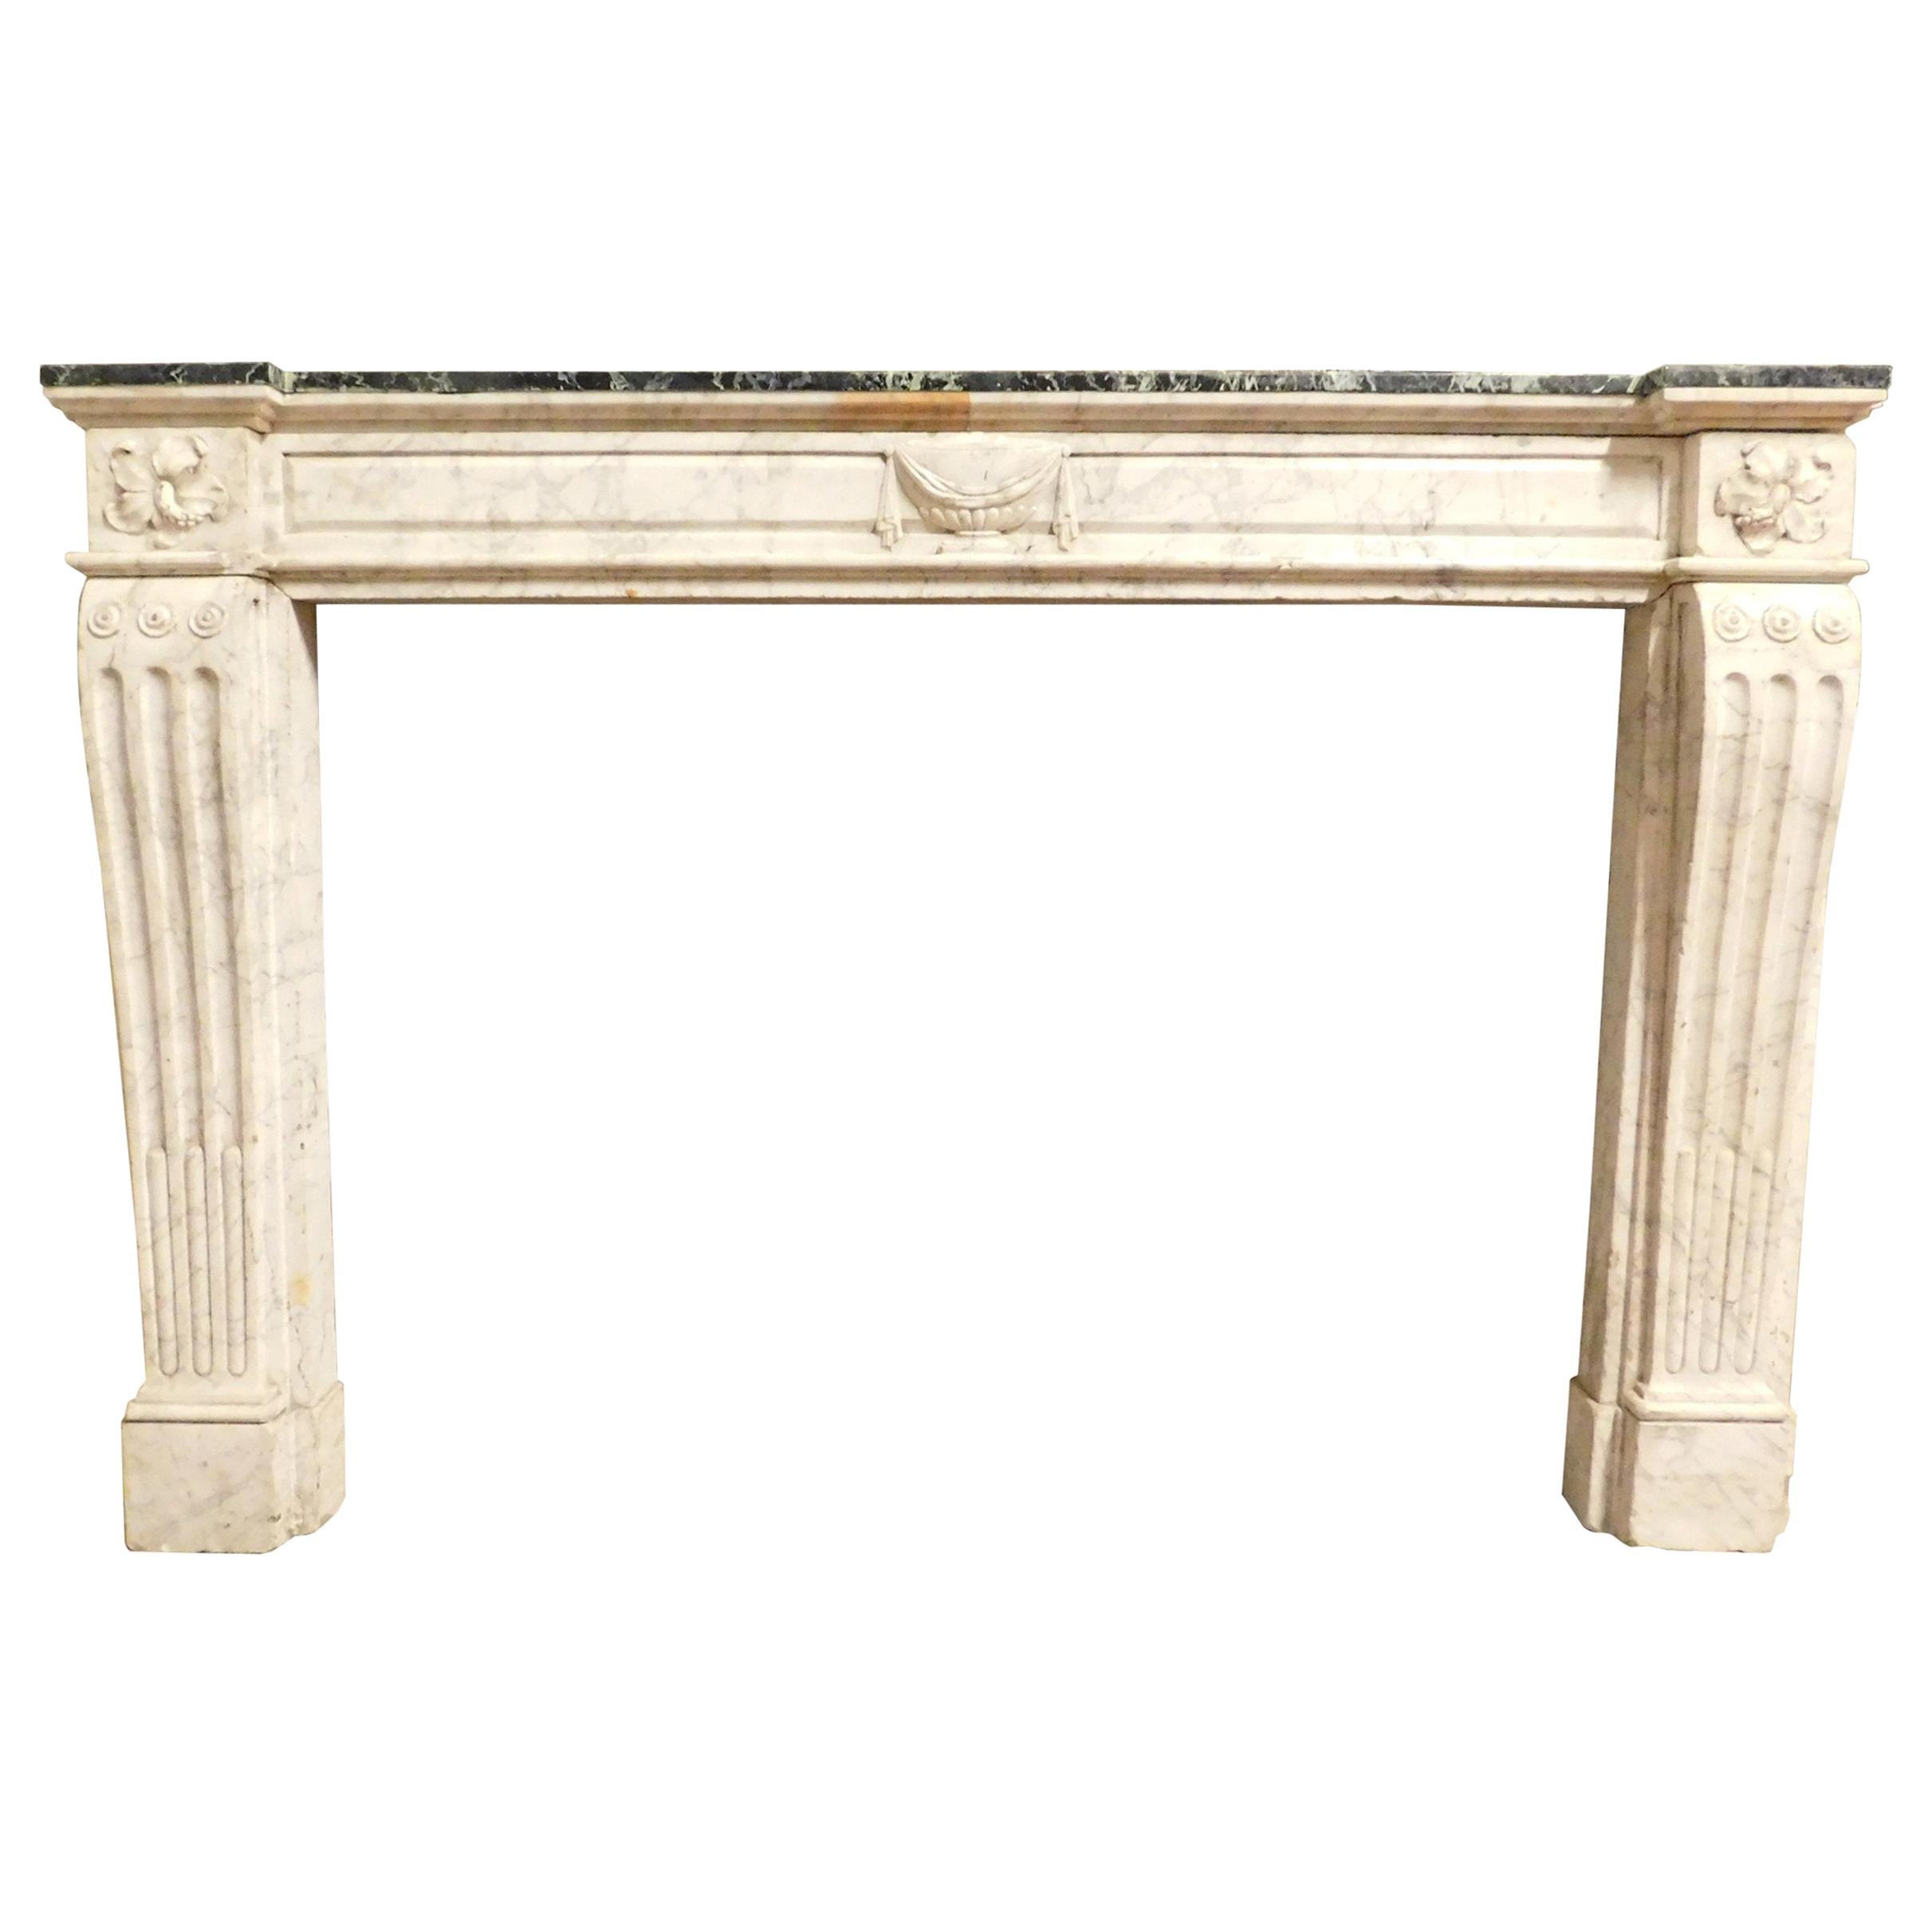 Antique Fireplace in White and Green Marble, Louis XVI, 18th Century France